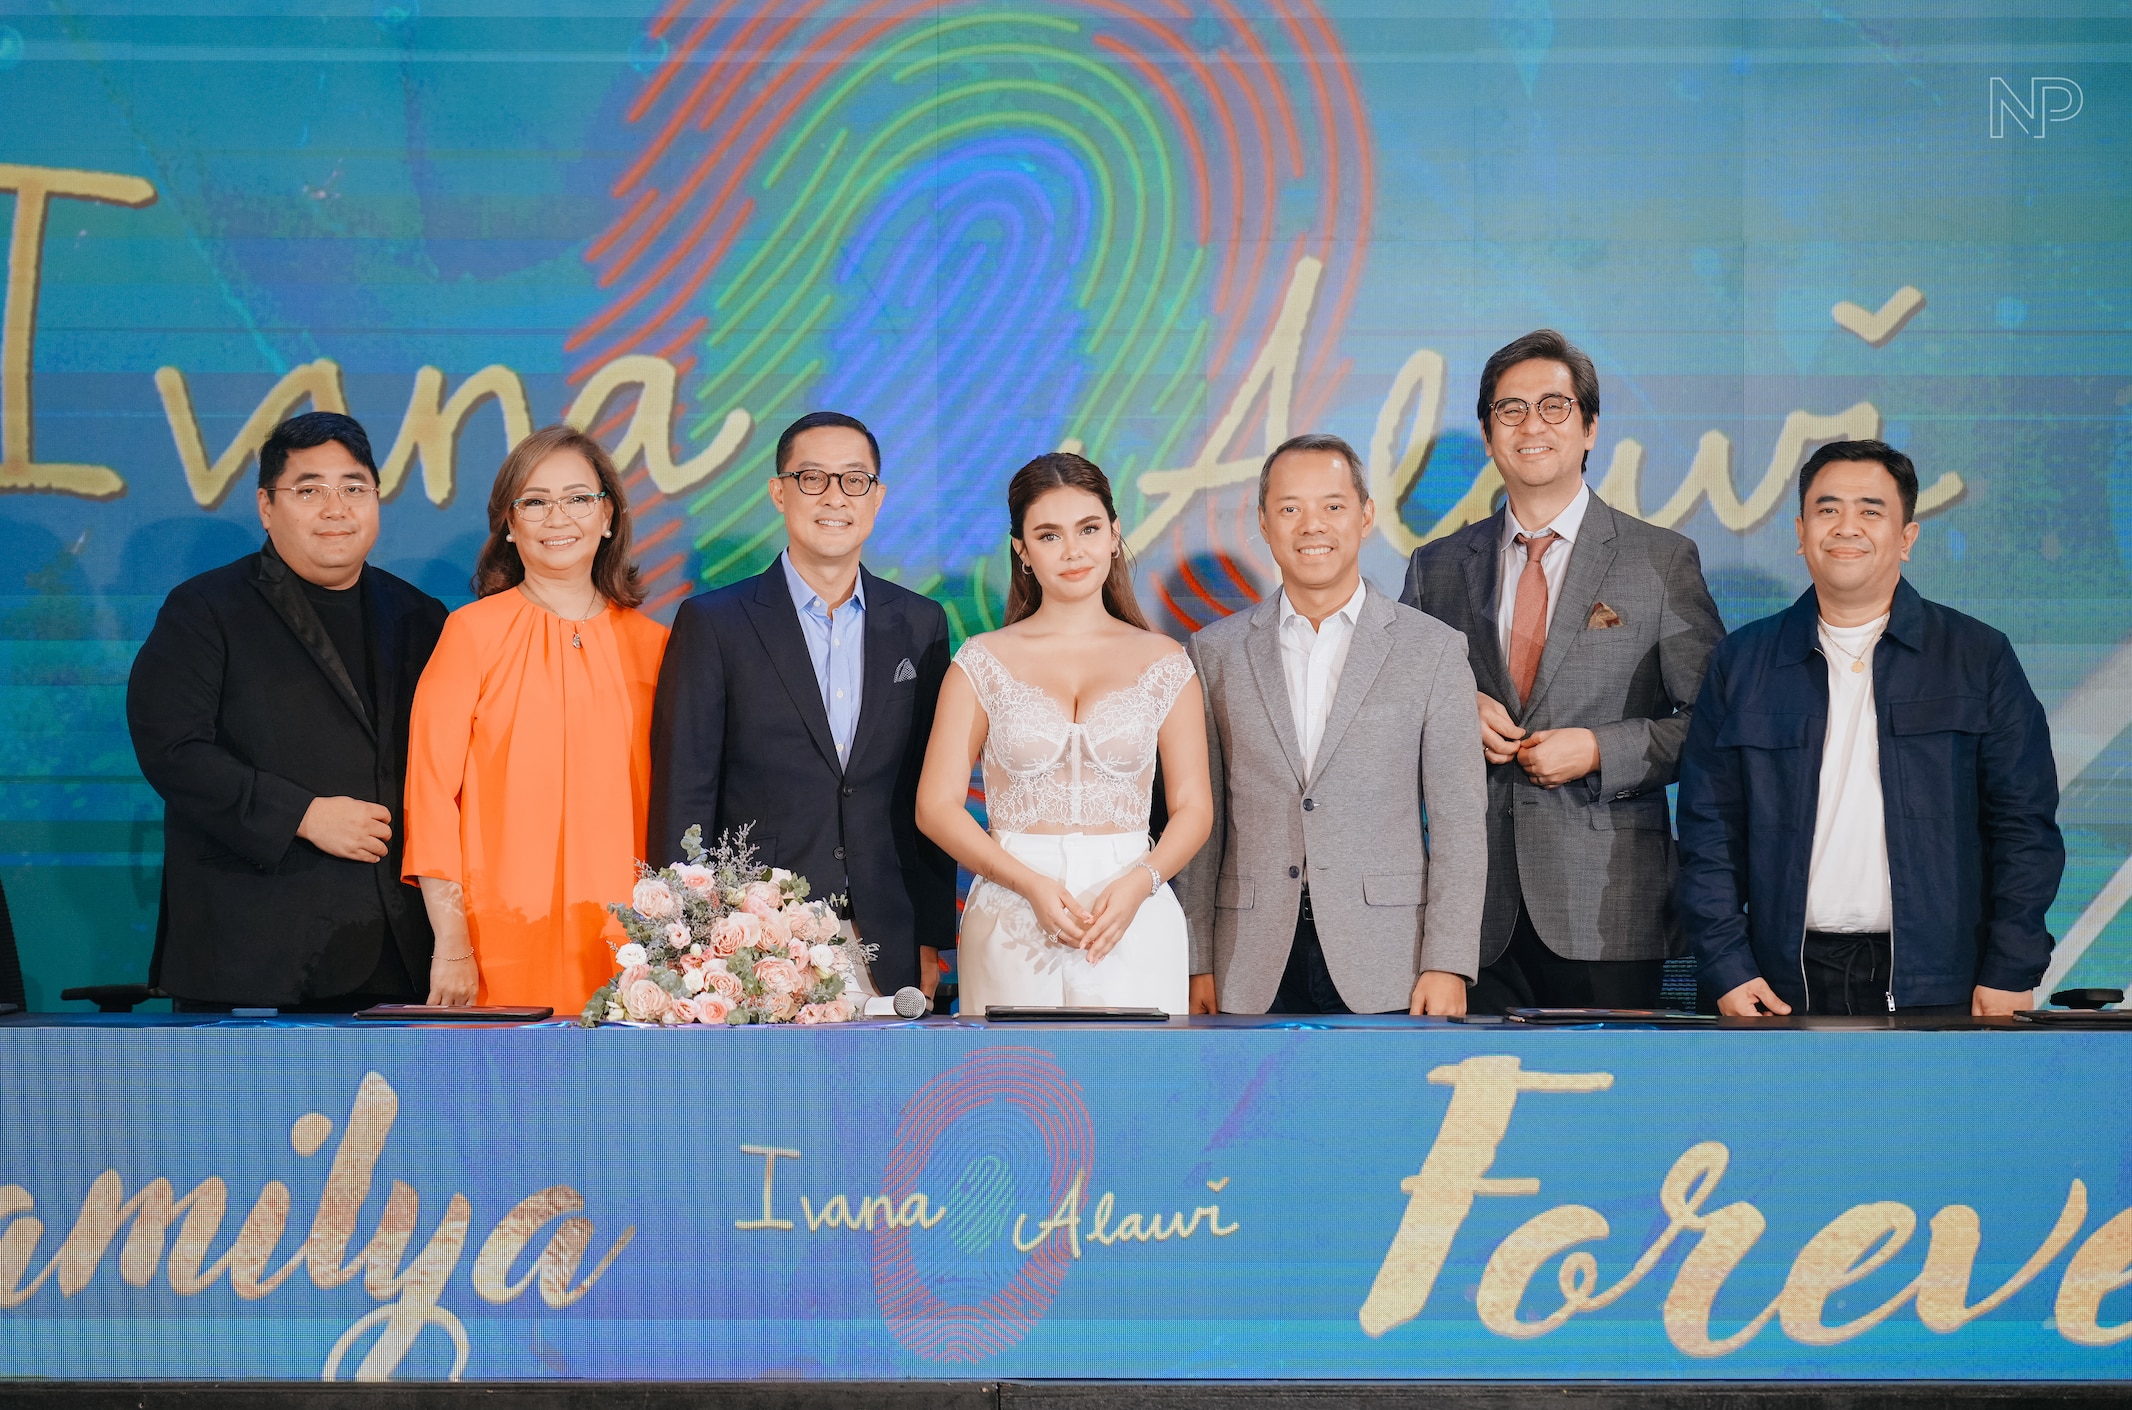 Ivana Alawi renews contract with ABS-CBN